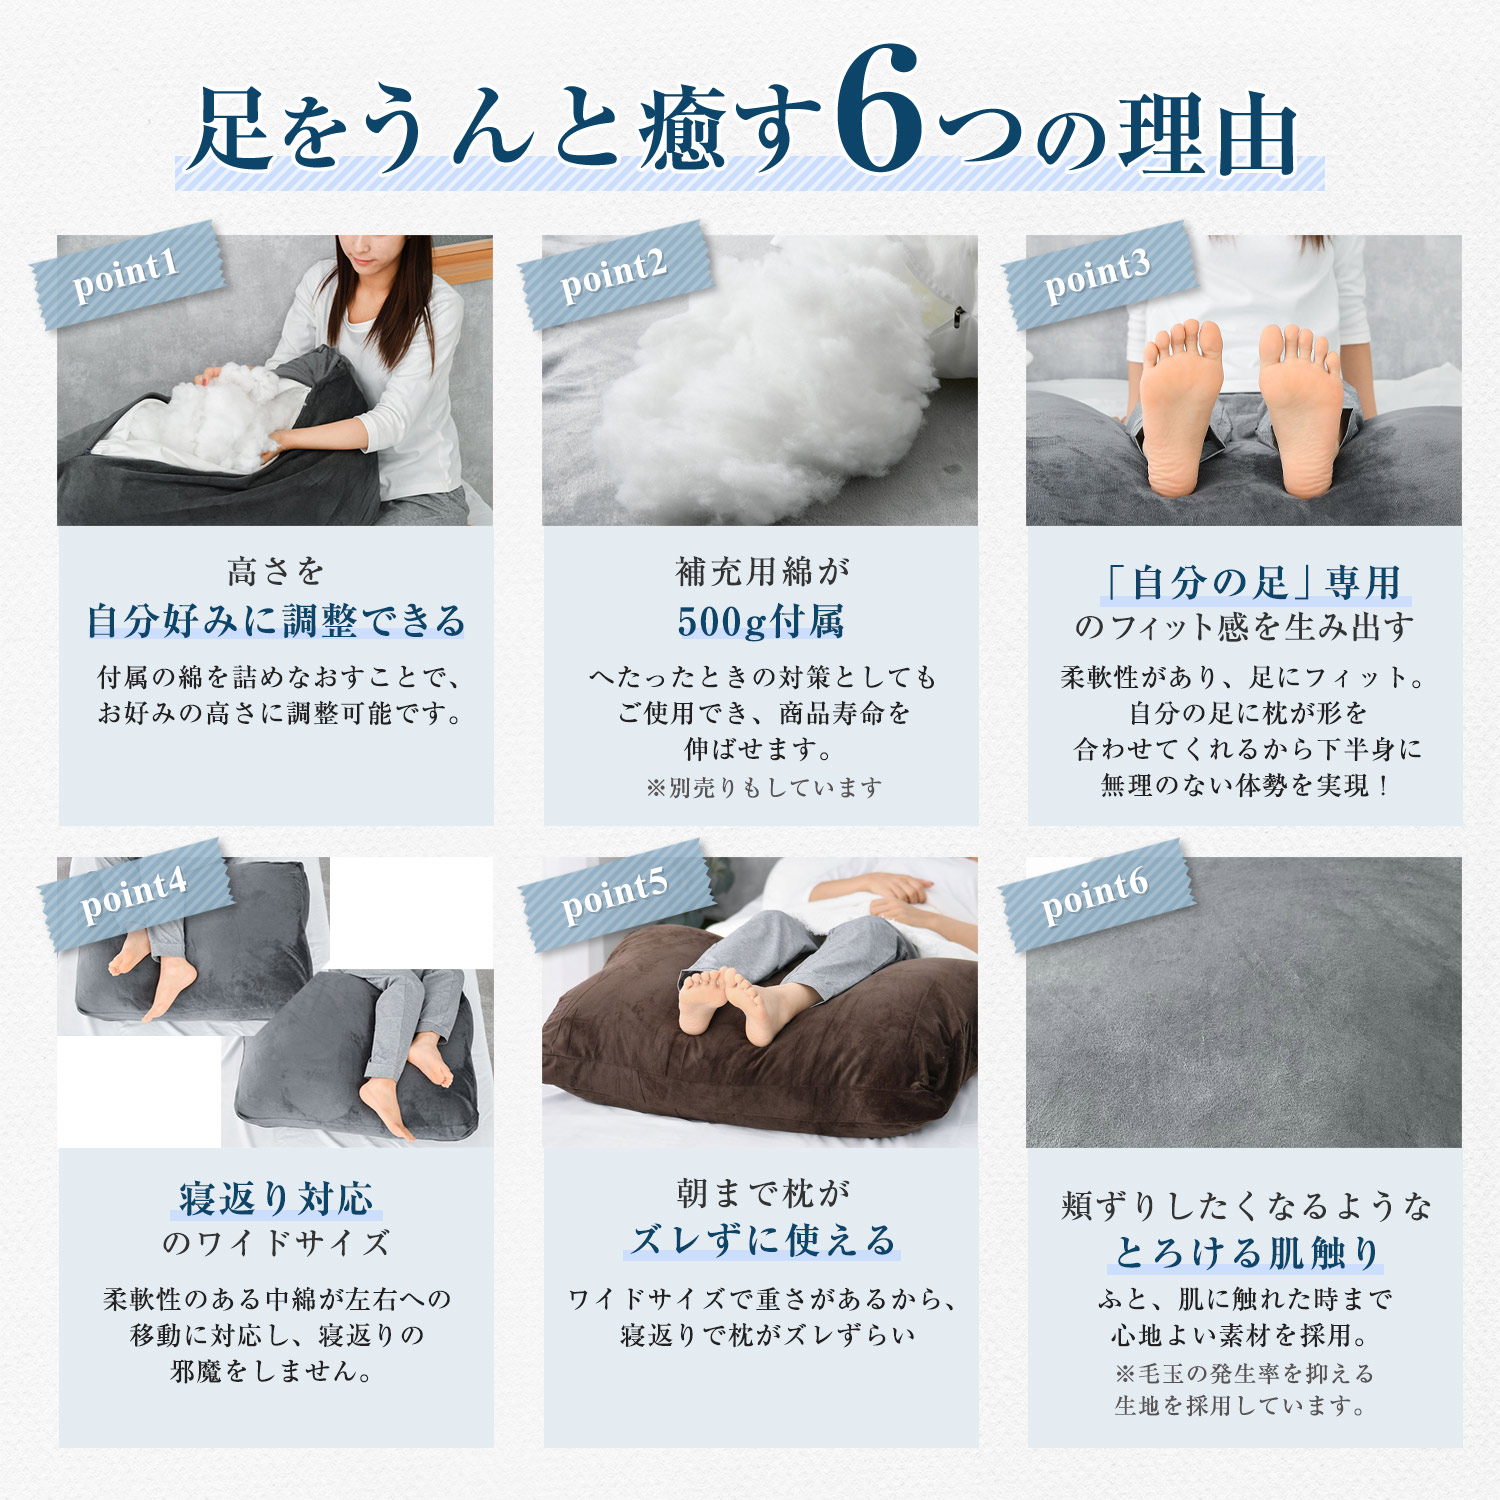  integer body . recommendation pair pillow asimochi edema height adjustment is possible pair ... lumbago foot pillow ..... gift cover ...